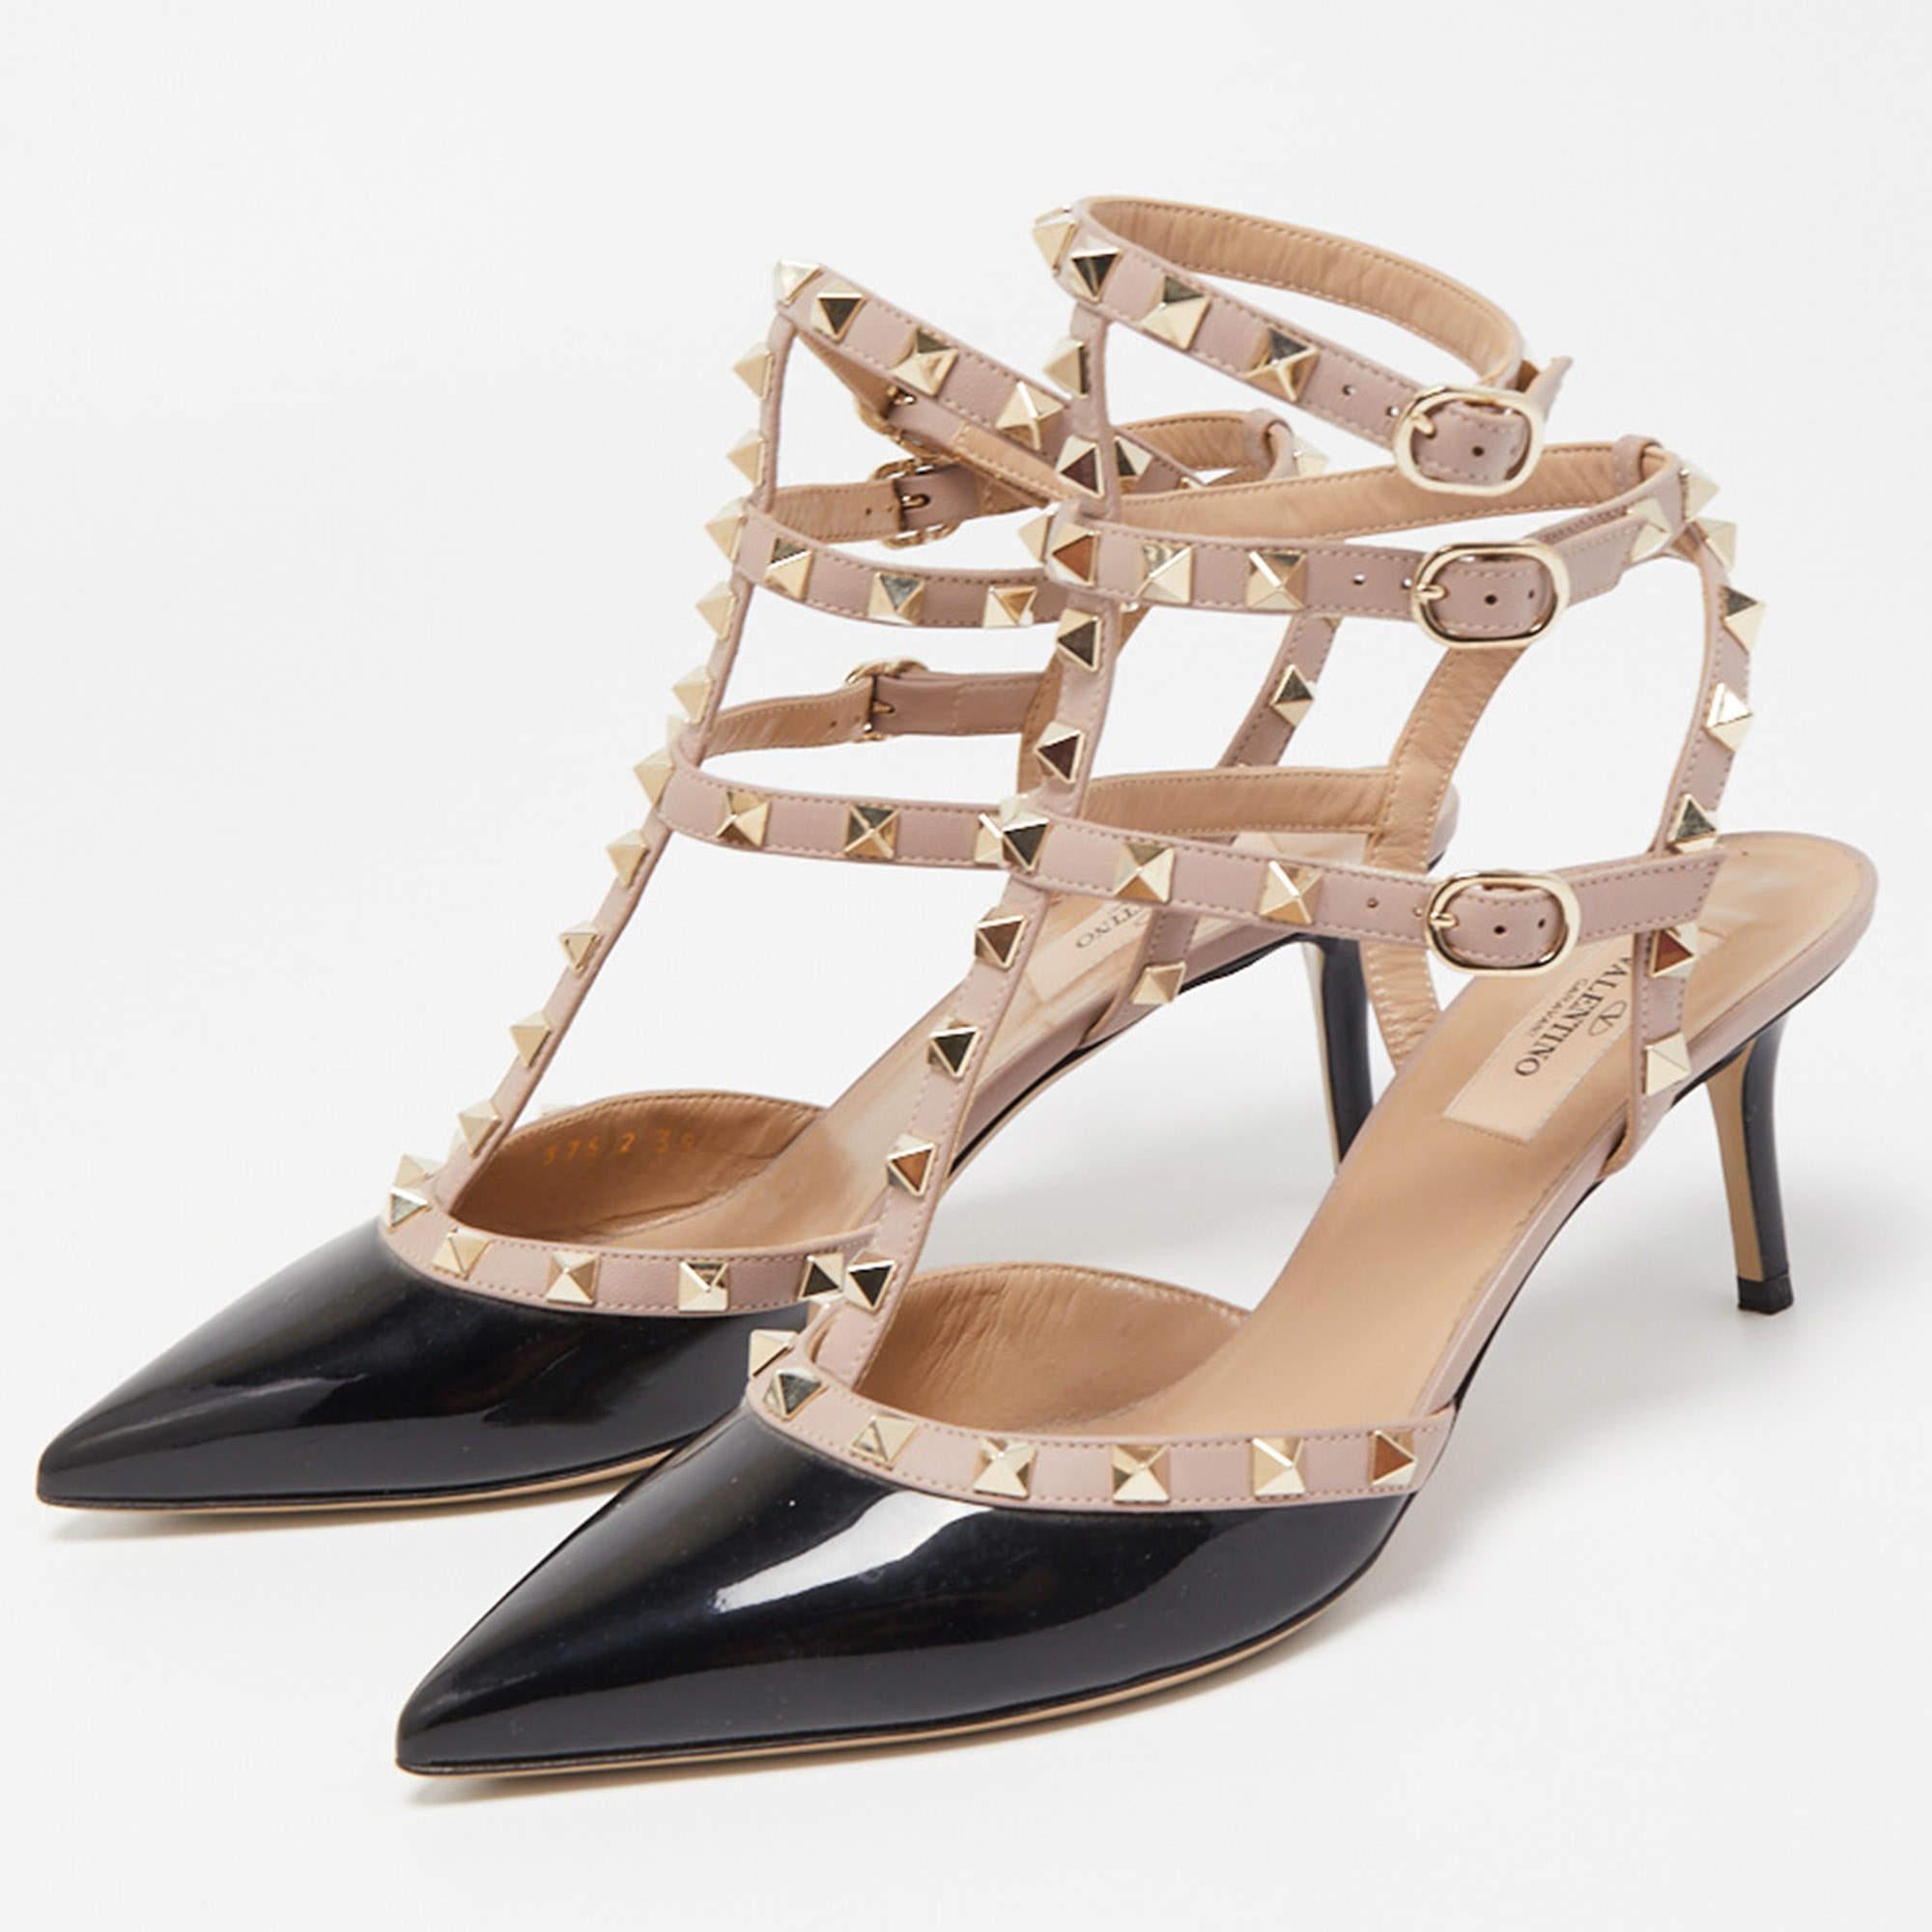 With a striking silhouette, these Valentino sandals can transition from day to night with ease. They come made from leather, and the addition of Rockstud reflects their meticulous craftsmanship. Designed in a beige shade, the strappy upper of the